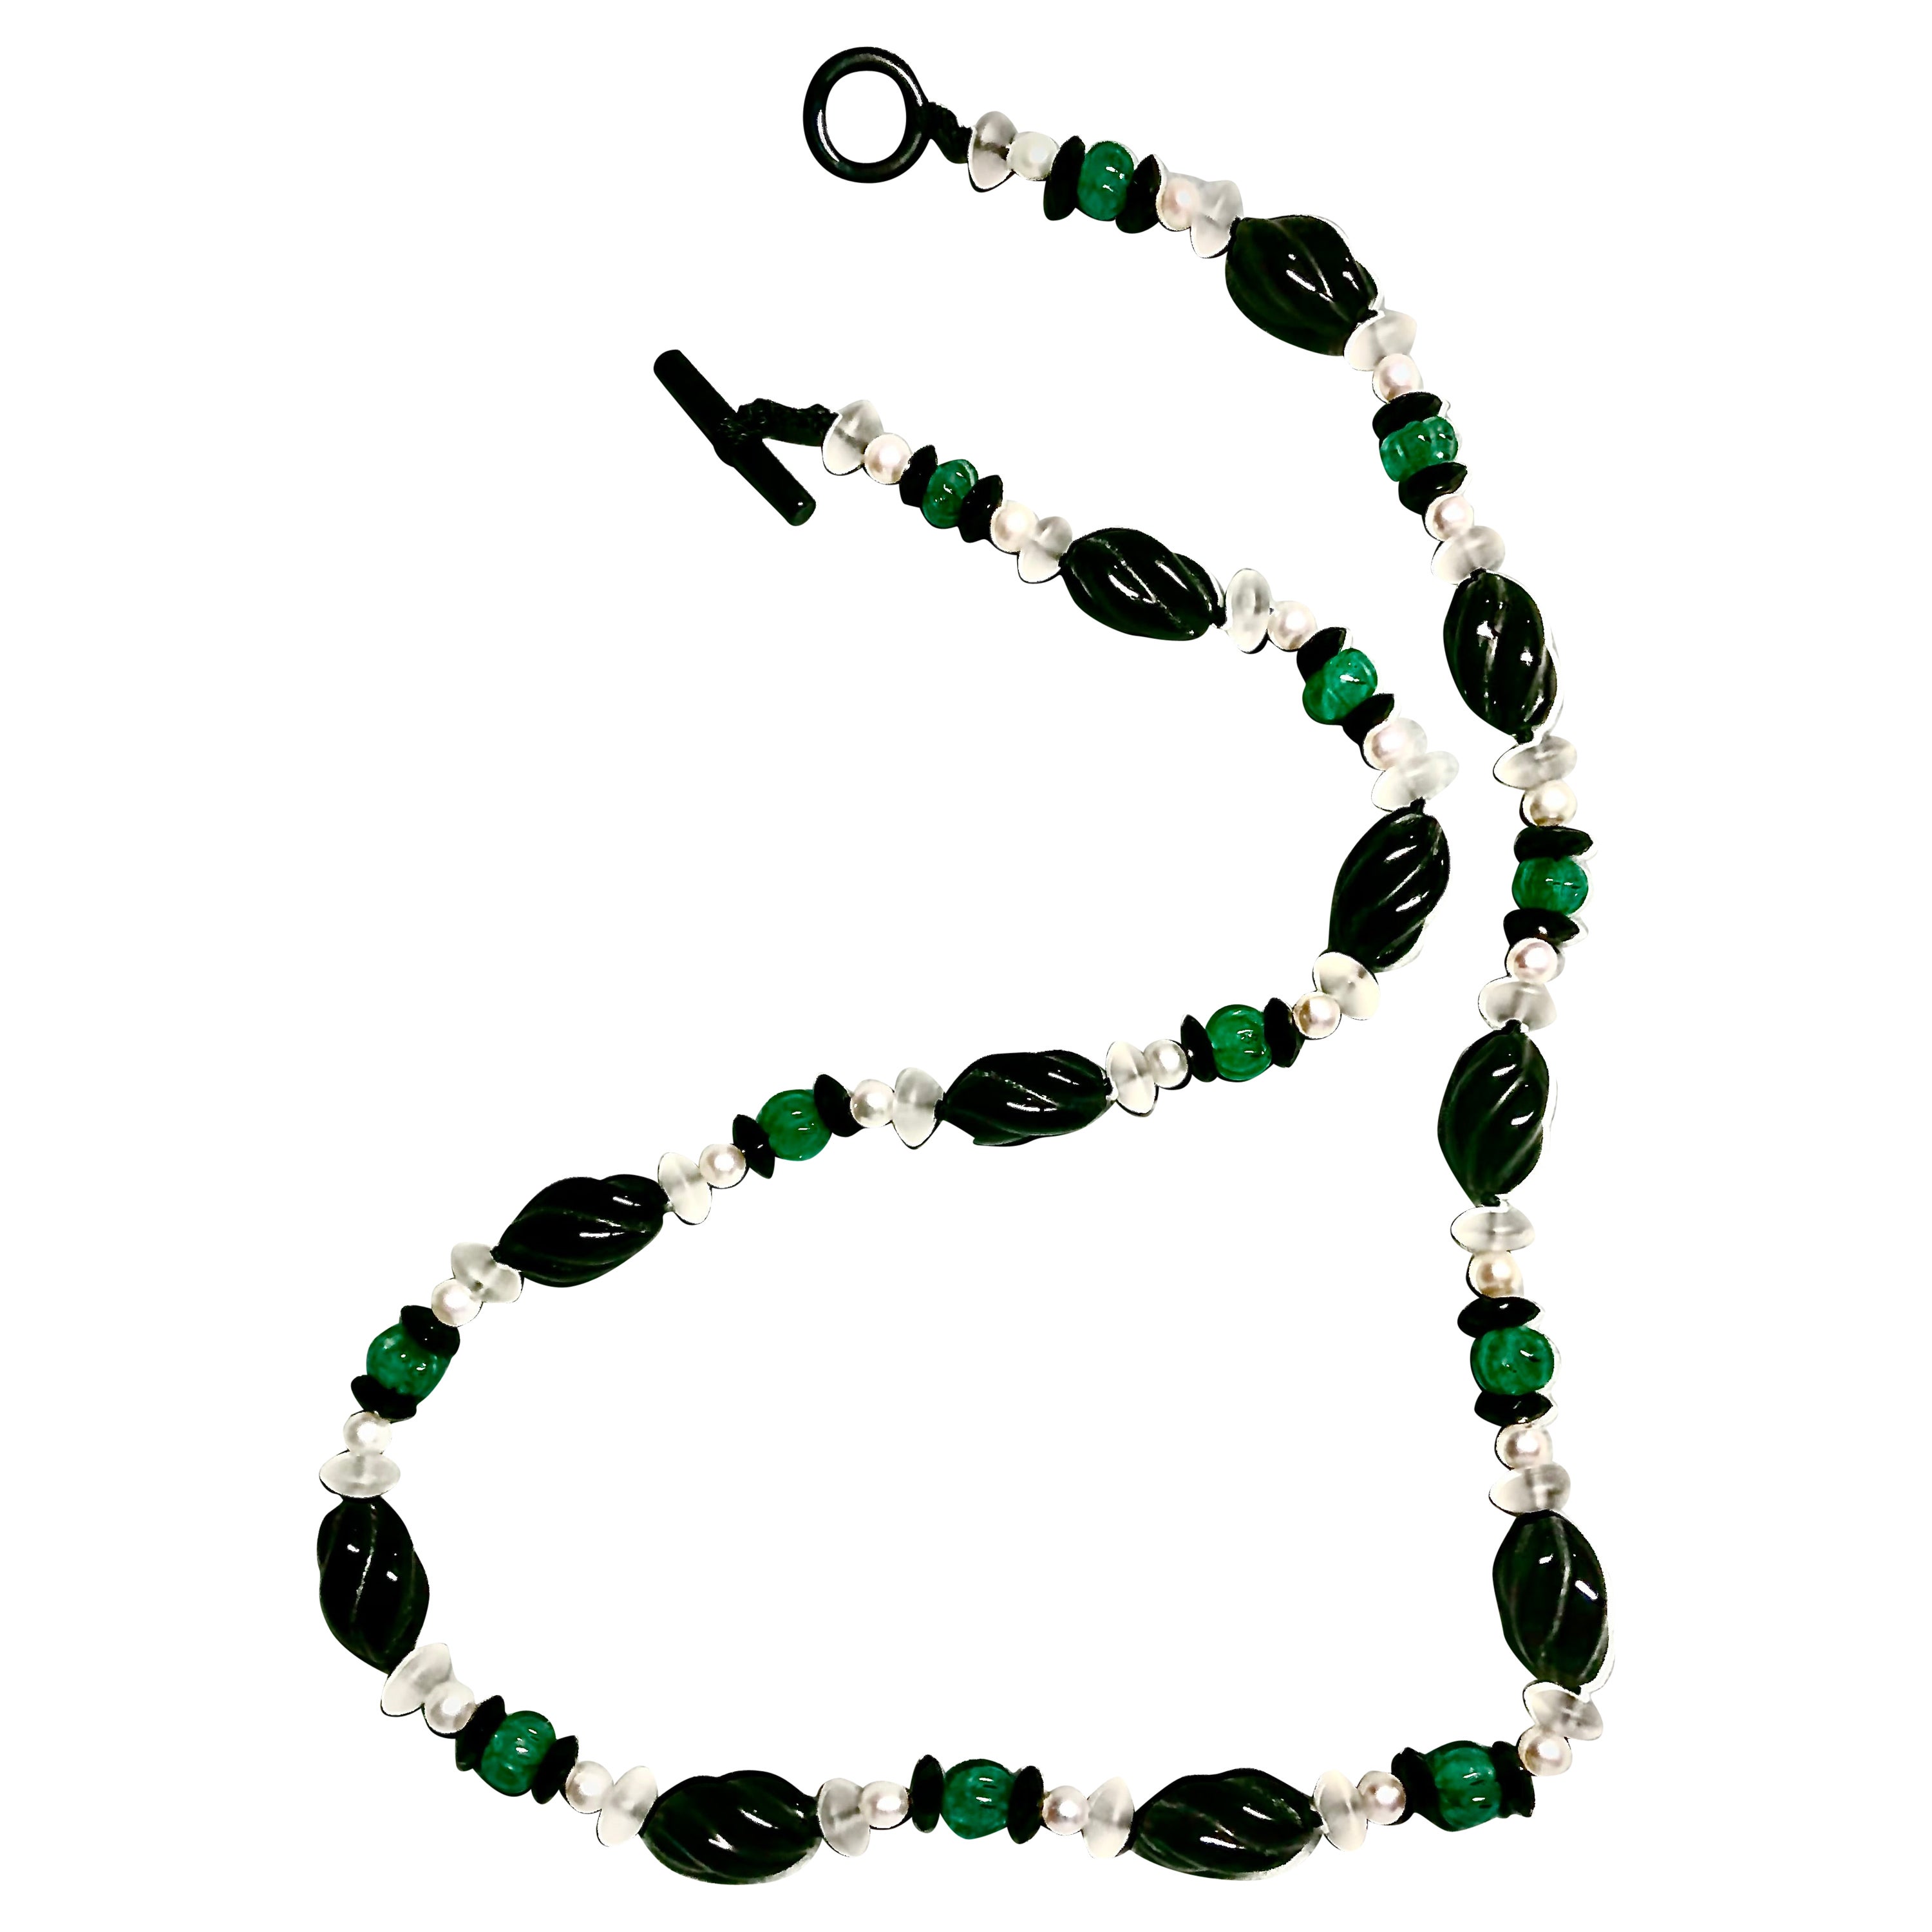 Very elegant long necklace of vintage hand carved torchon black onyx beads. These are extremely rare to find, and I basically source them from antique stock.

These beautiful onyx beads are flanked with frosted rock crystal smooth rondelles. These